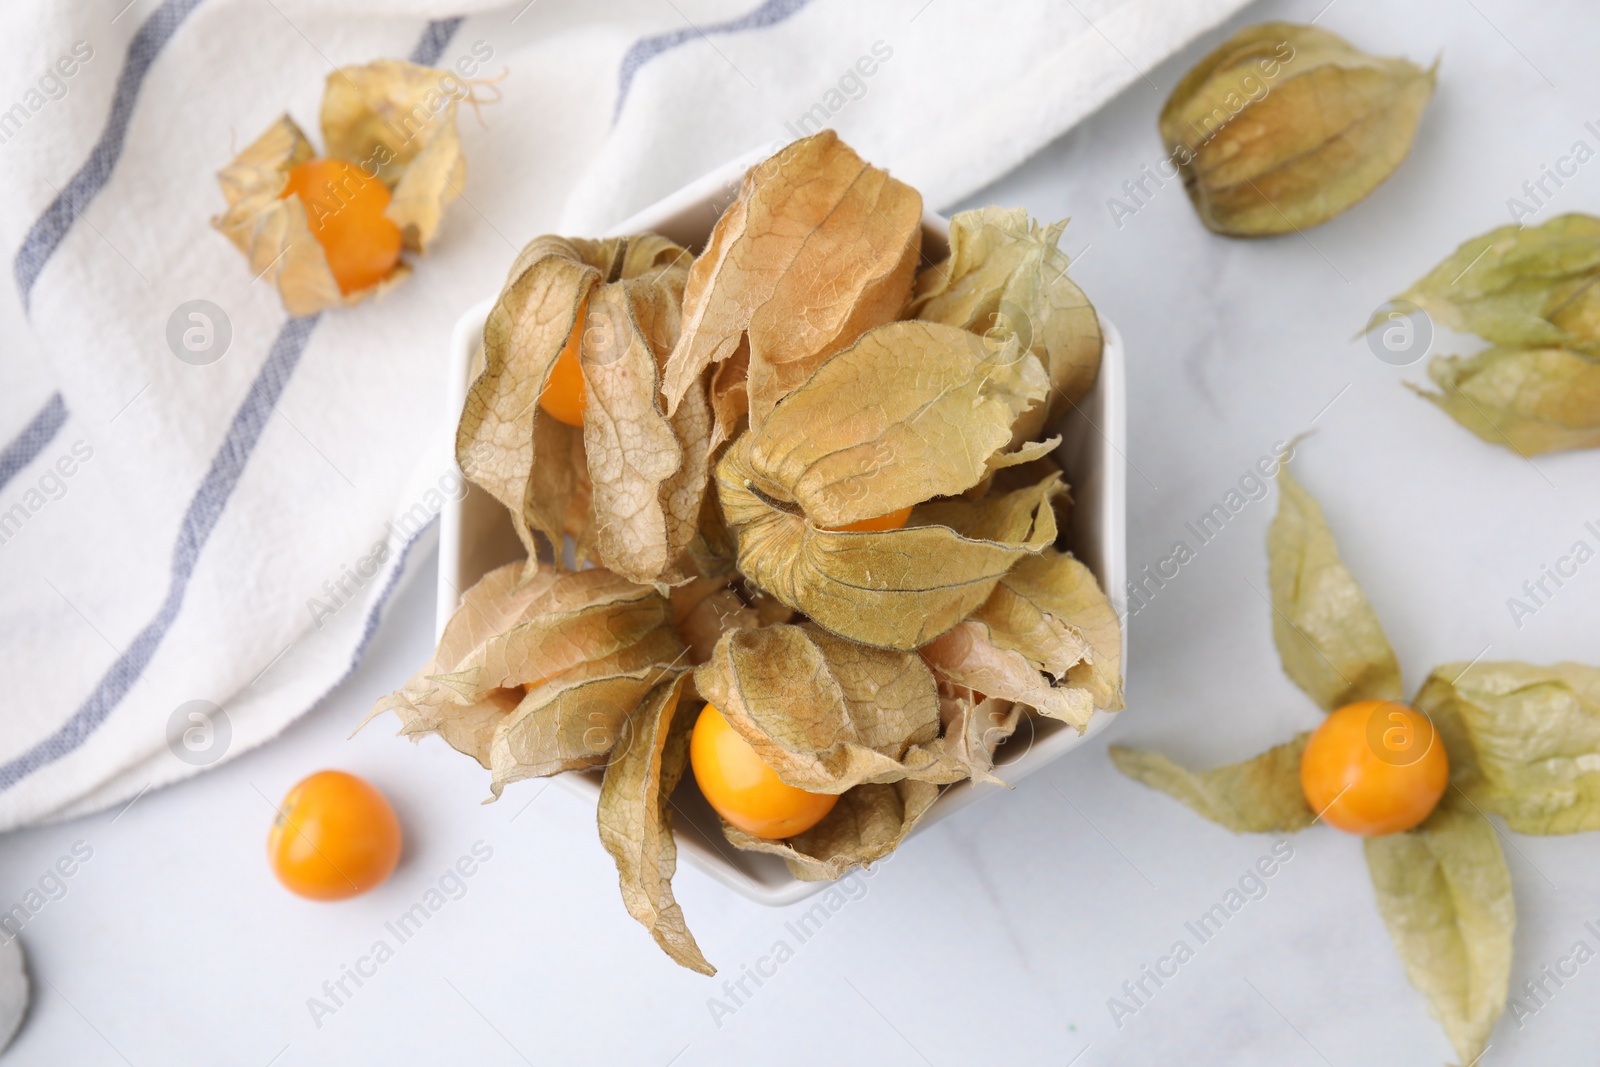 Photo of Ripe physalis fruits with calyxes in bowl on white marble table, flat lay